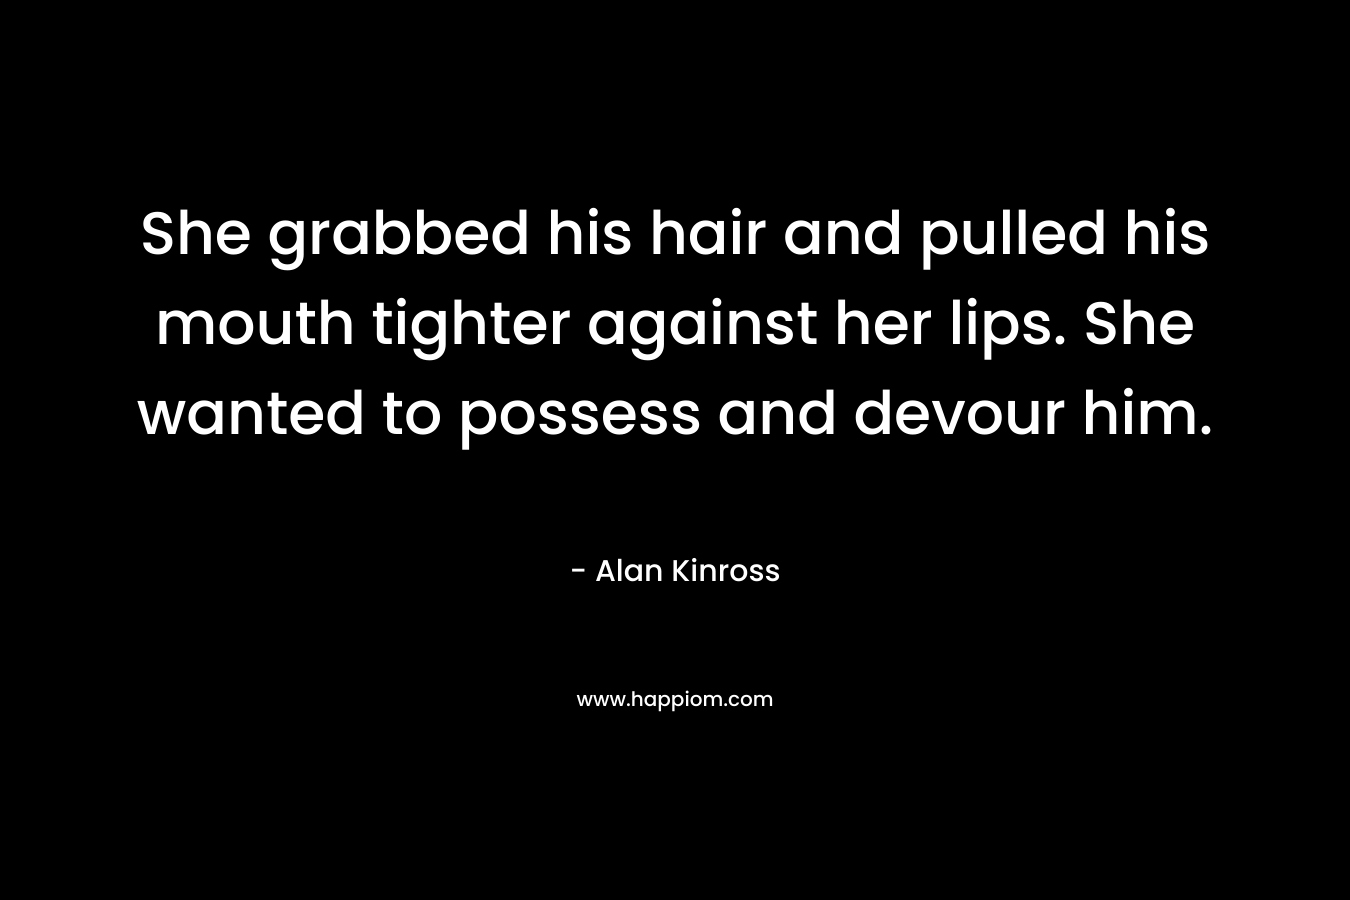 She grabbed his hair and pulled his mouth tighter against her lips. She wanted to possess and devour him. – Alan Kinross